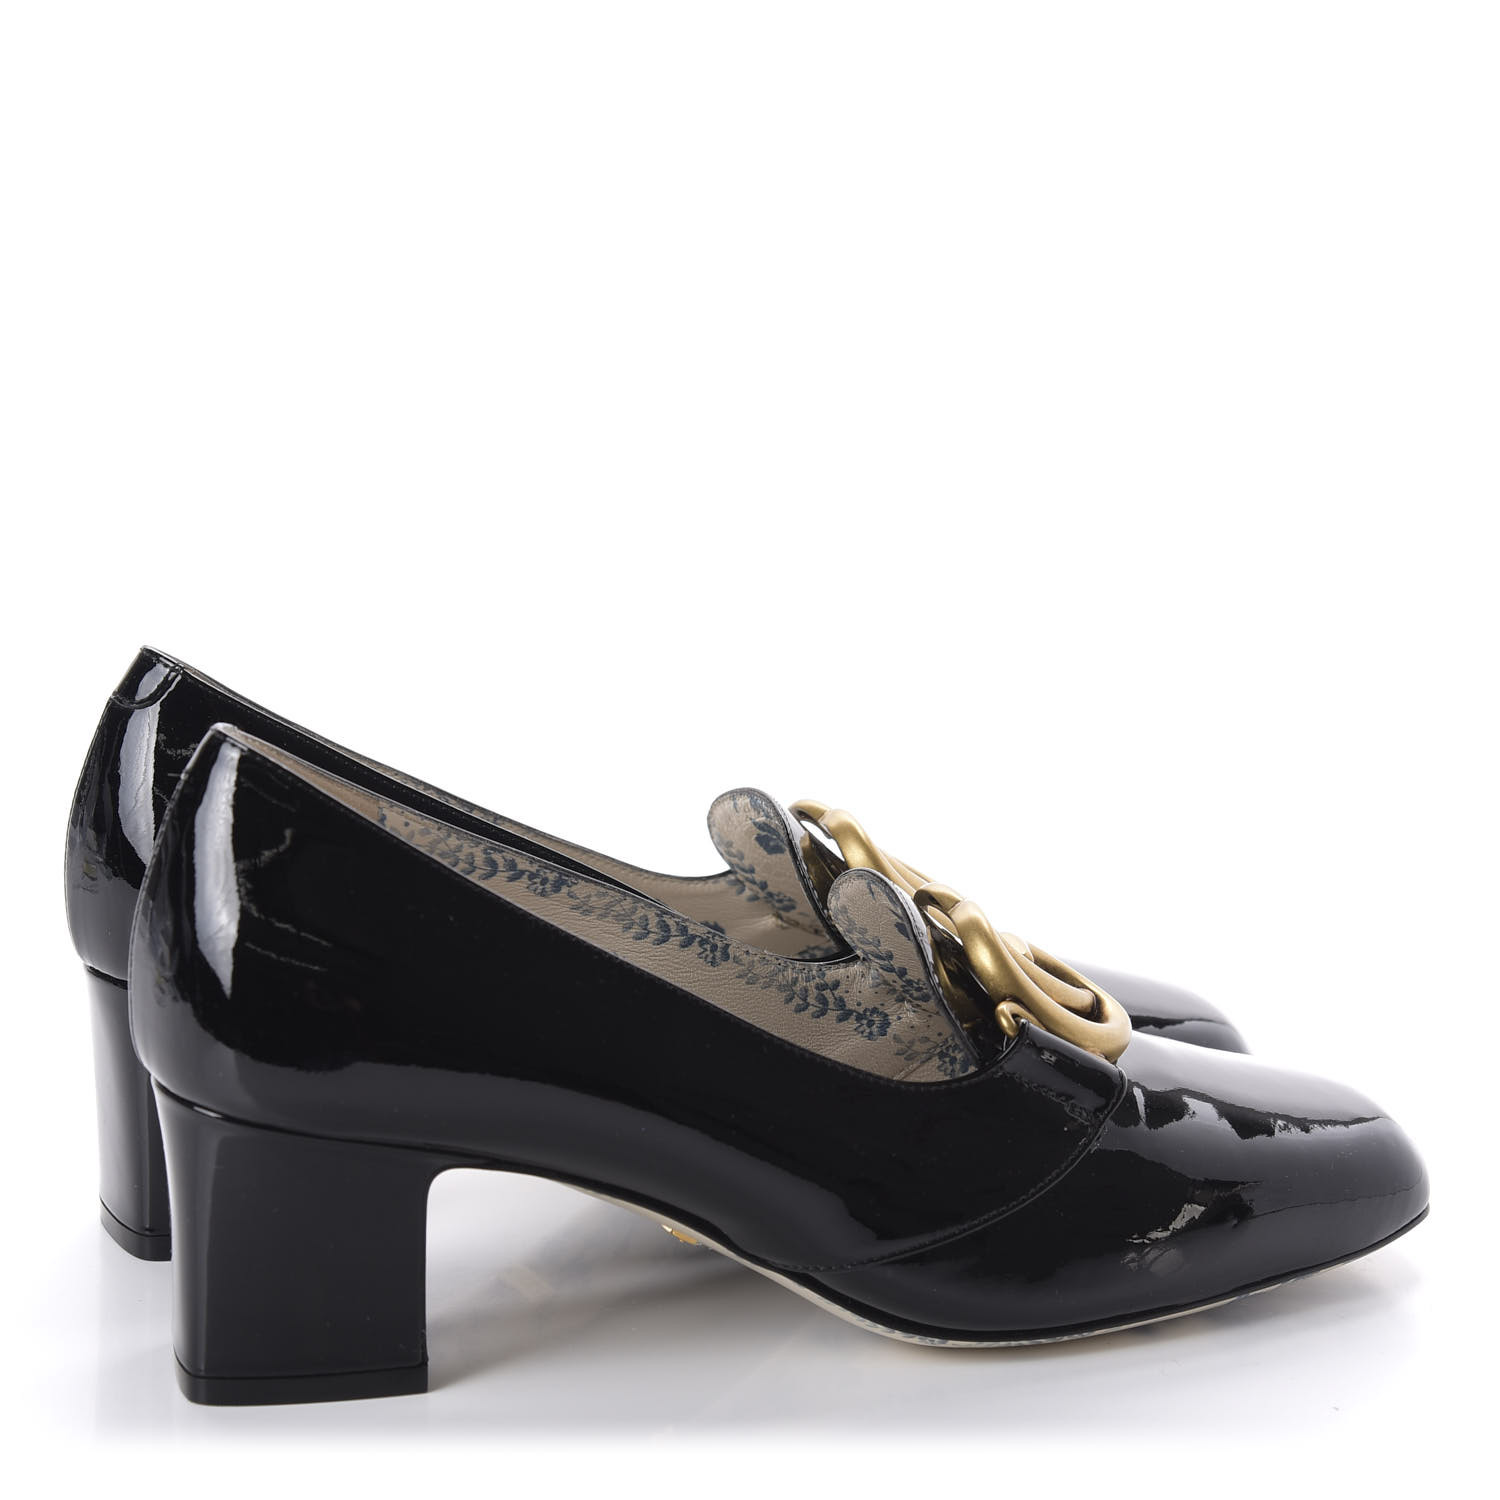 GUCCI Patent GG Marmont Mid Heel Loafer Pumps 38 Black 624539 ...